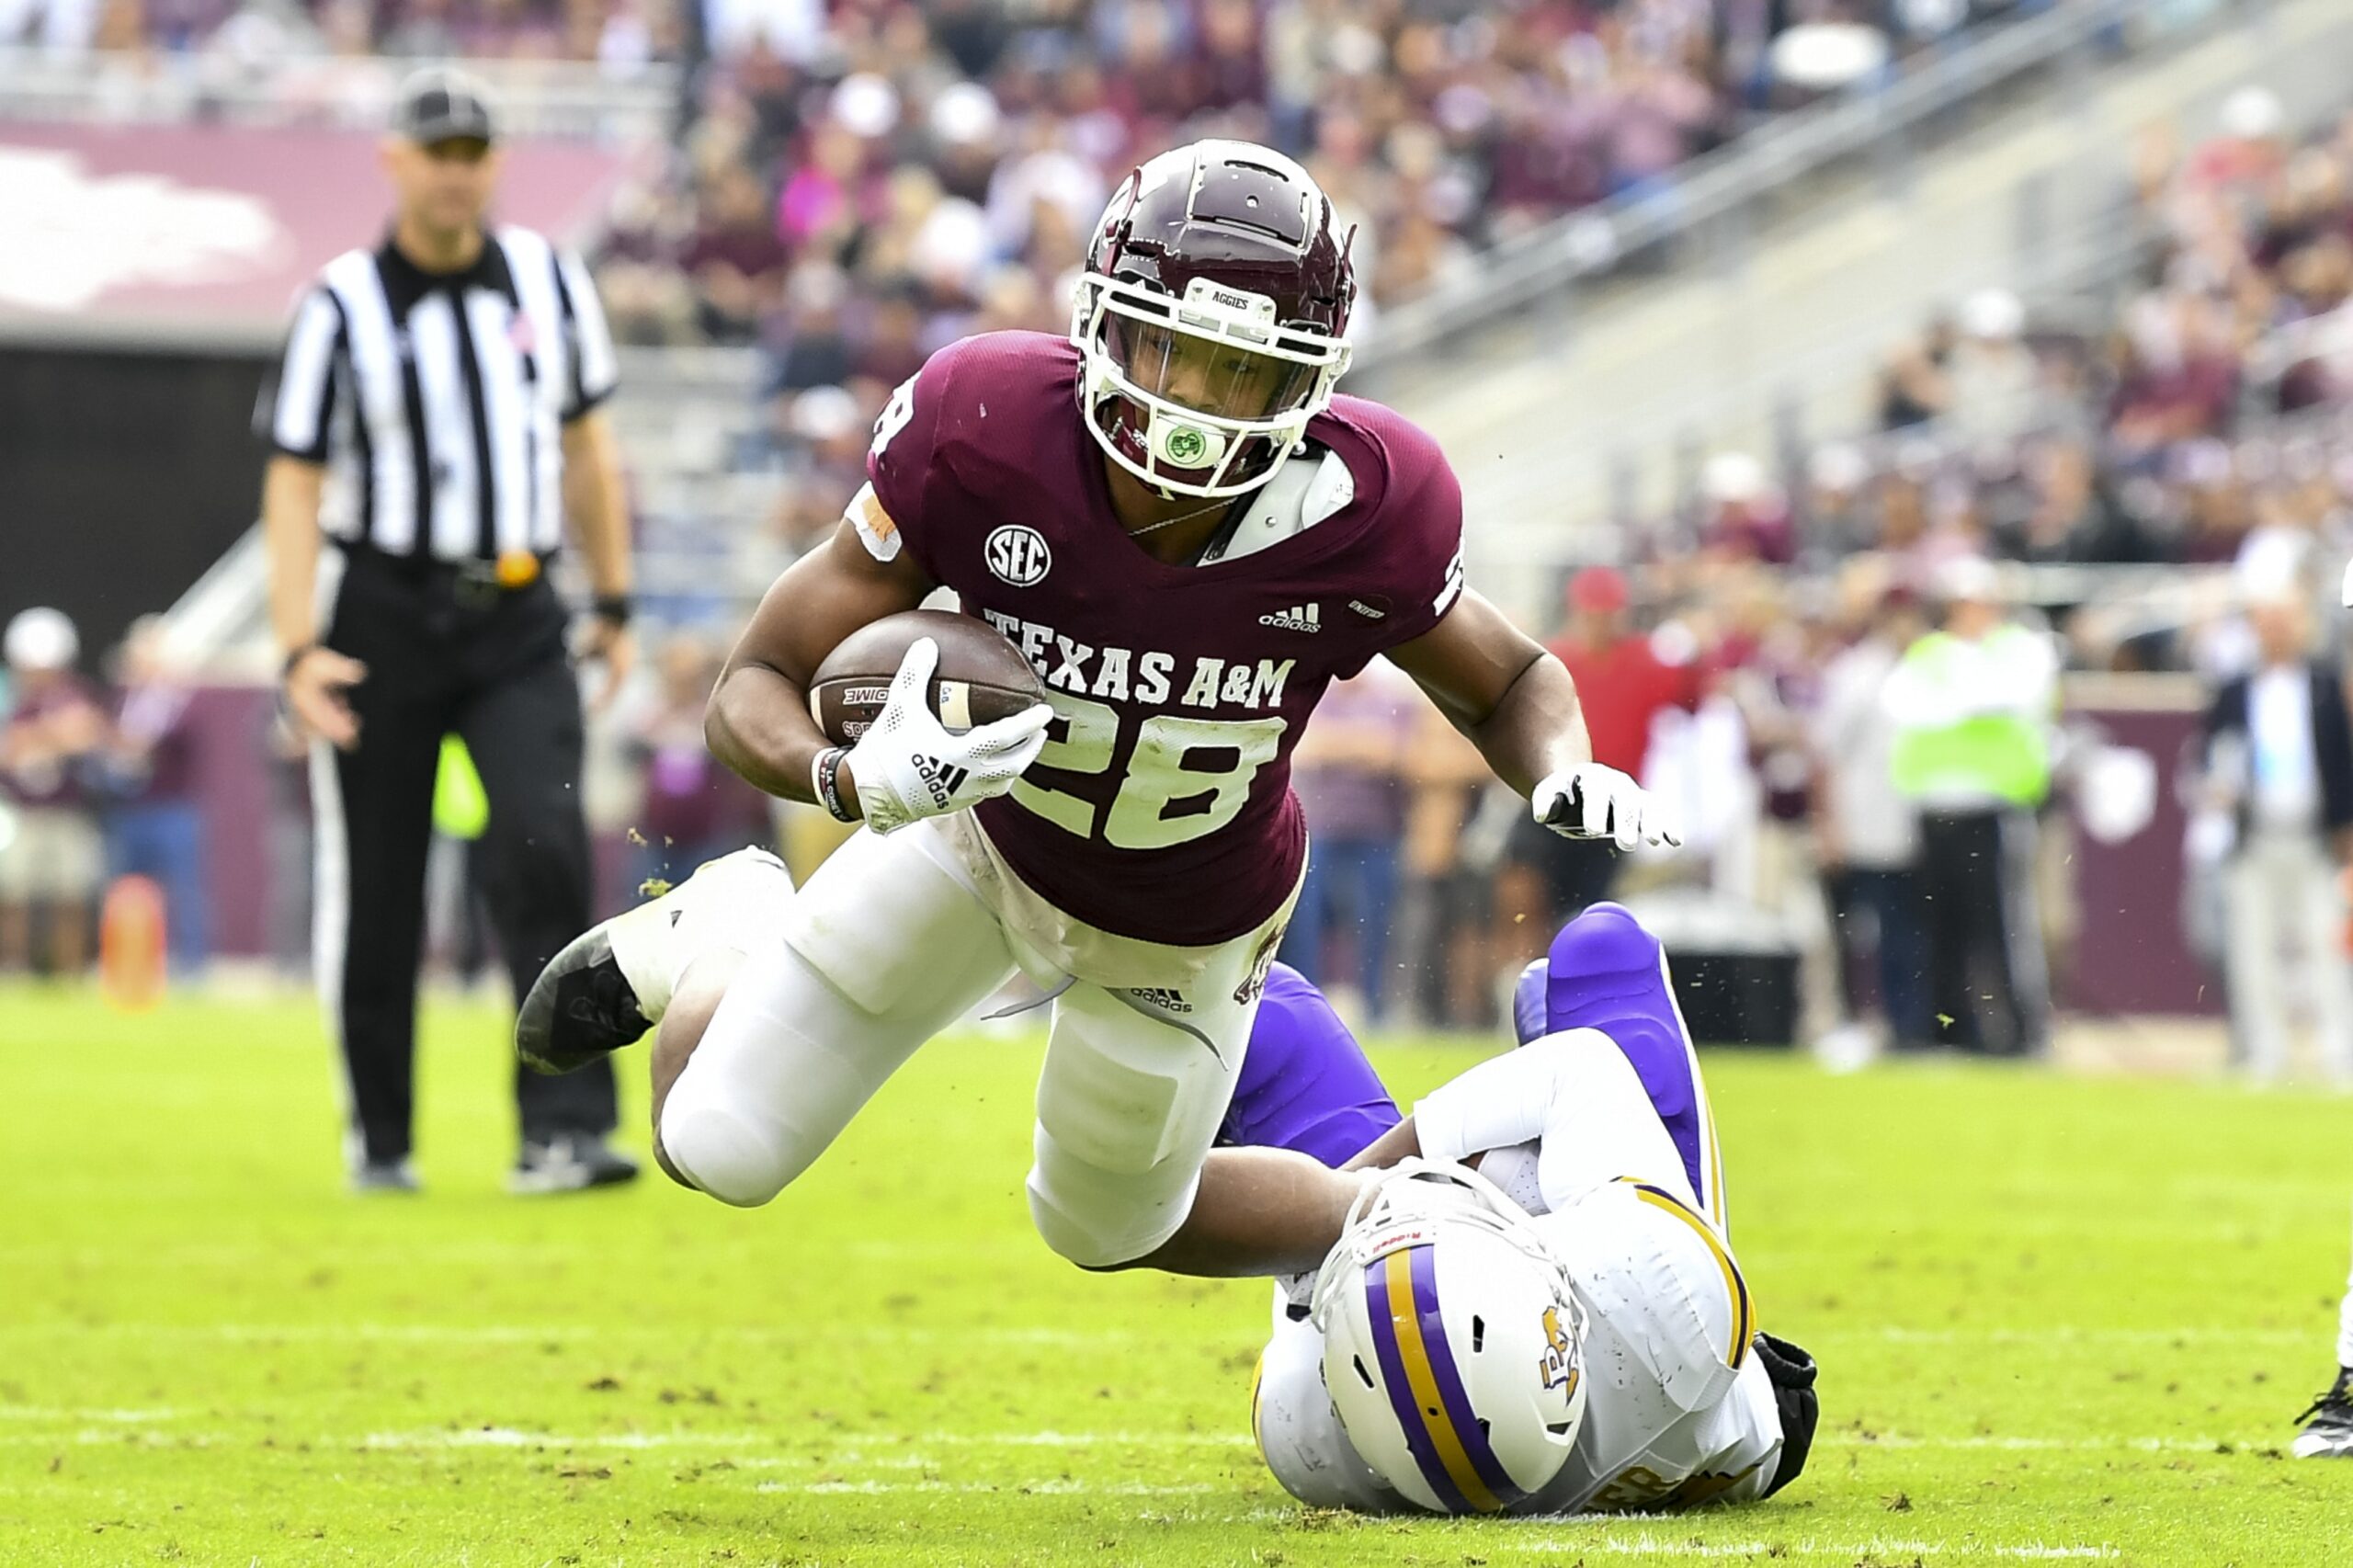 NFL Draft Sleepers: Isaiah Spiller and Perrion Winfrey among prospects to  watch